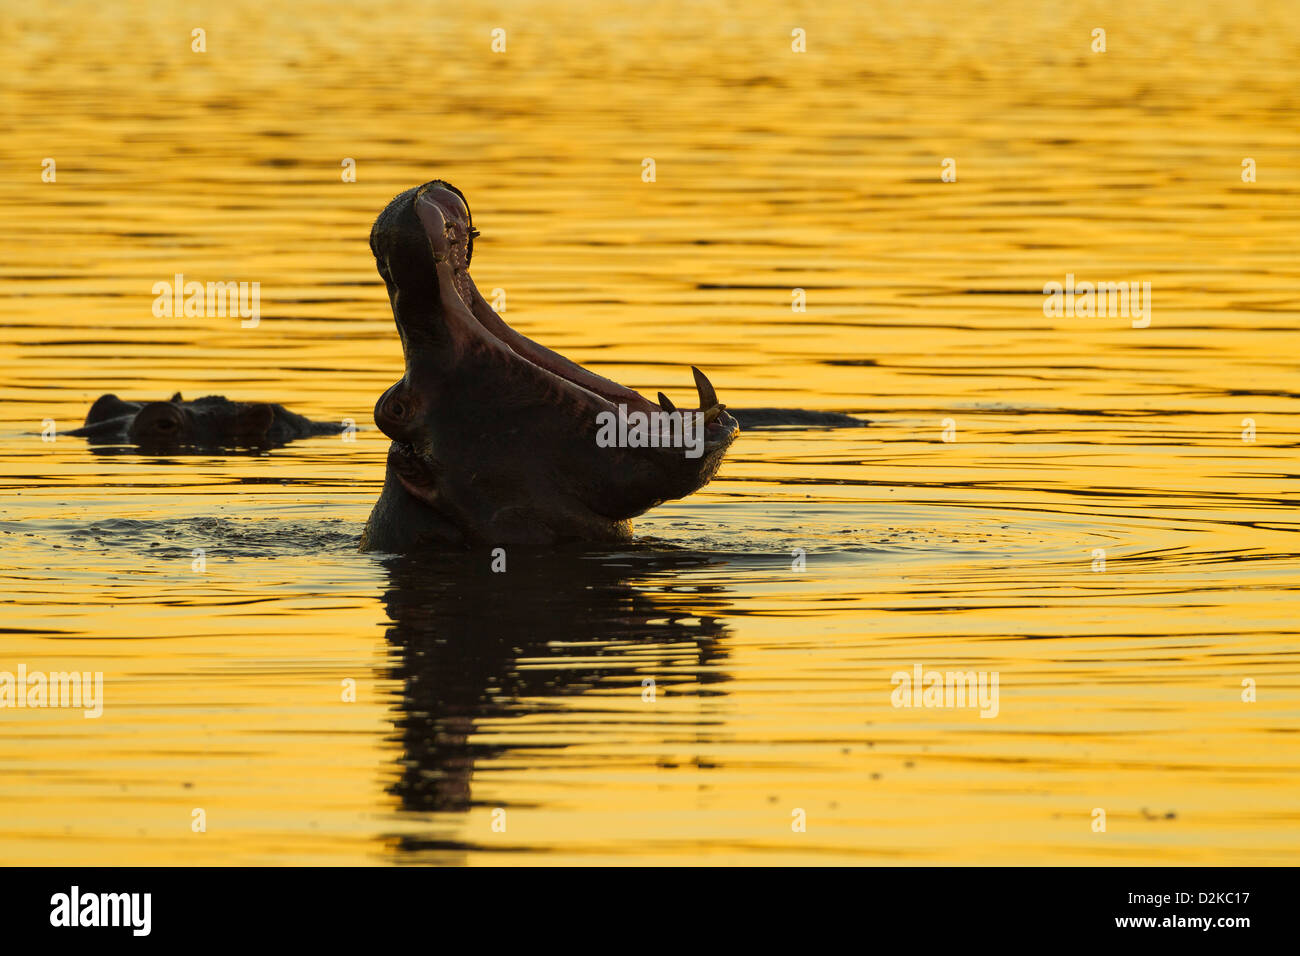 Silhouette of a hippopotamus yawning in the golden evening light Stock Photo